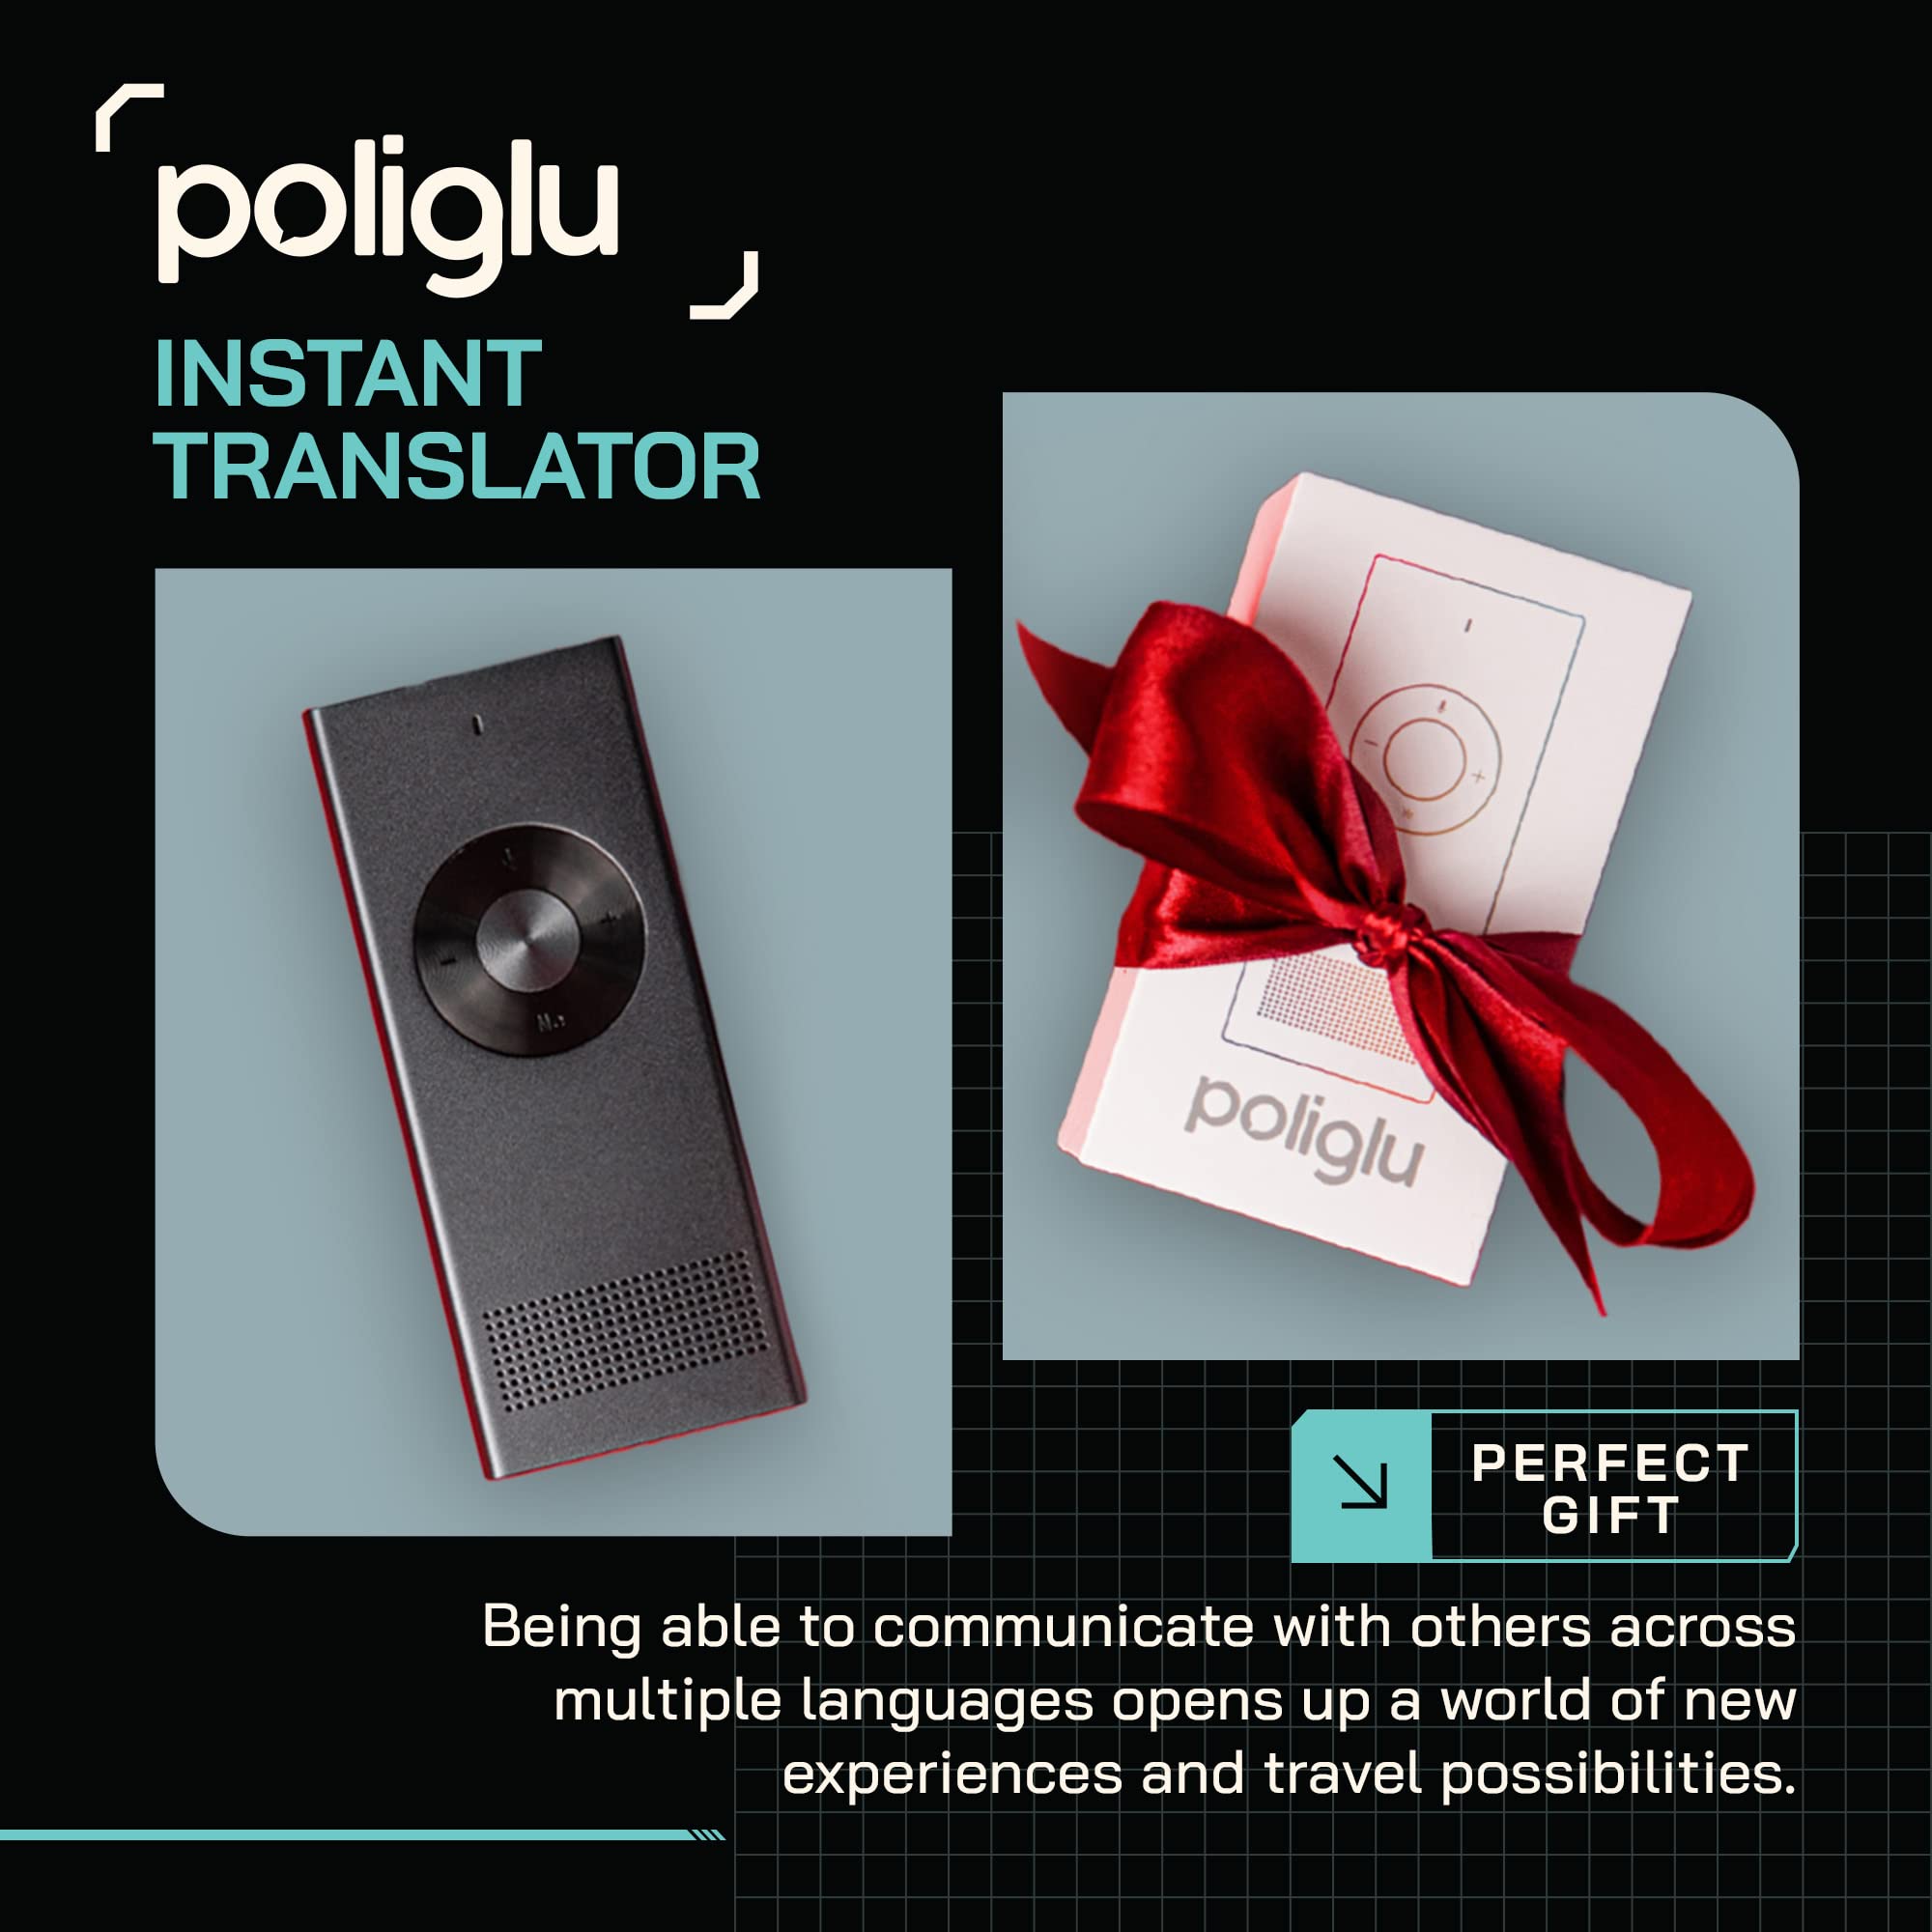 Poliglu Instant Two-Way Language Translator - Translators Devices for 36 Languages. Make Communication Easier with This Innovative Portable Translation Device. Perfect as a Pocket Dictionary